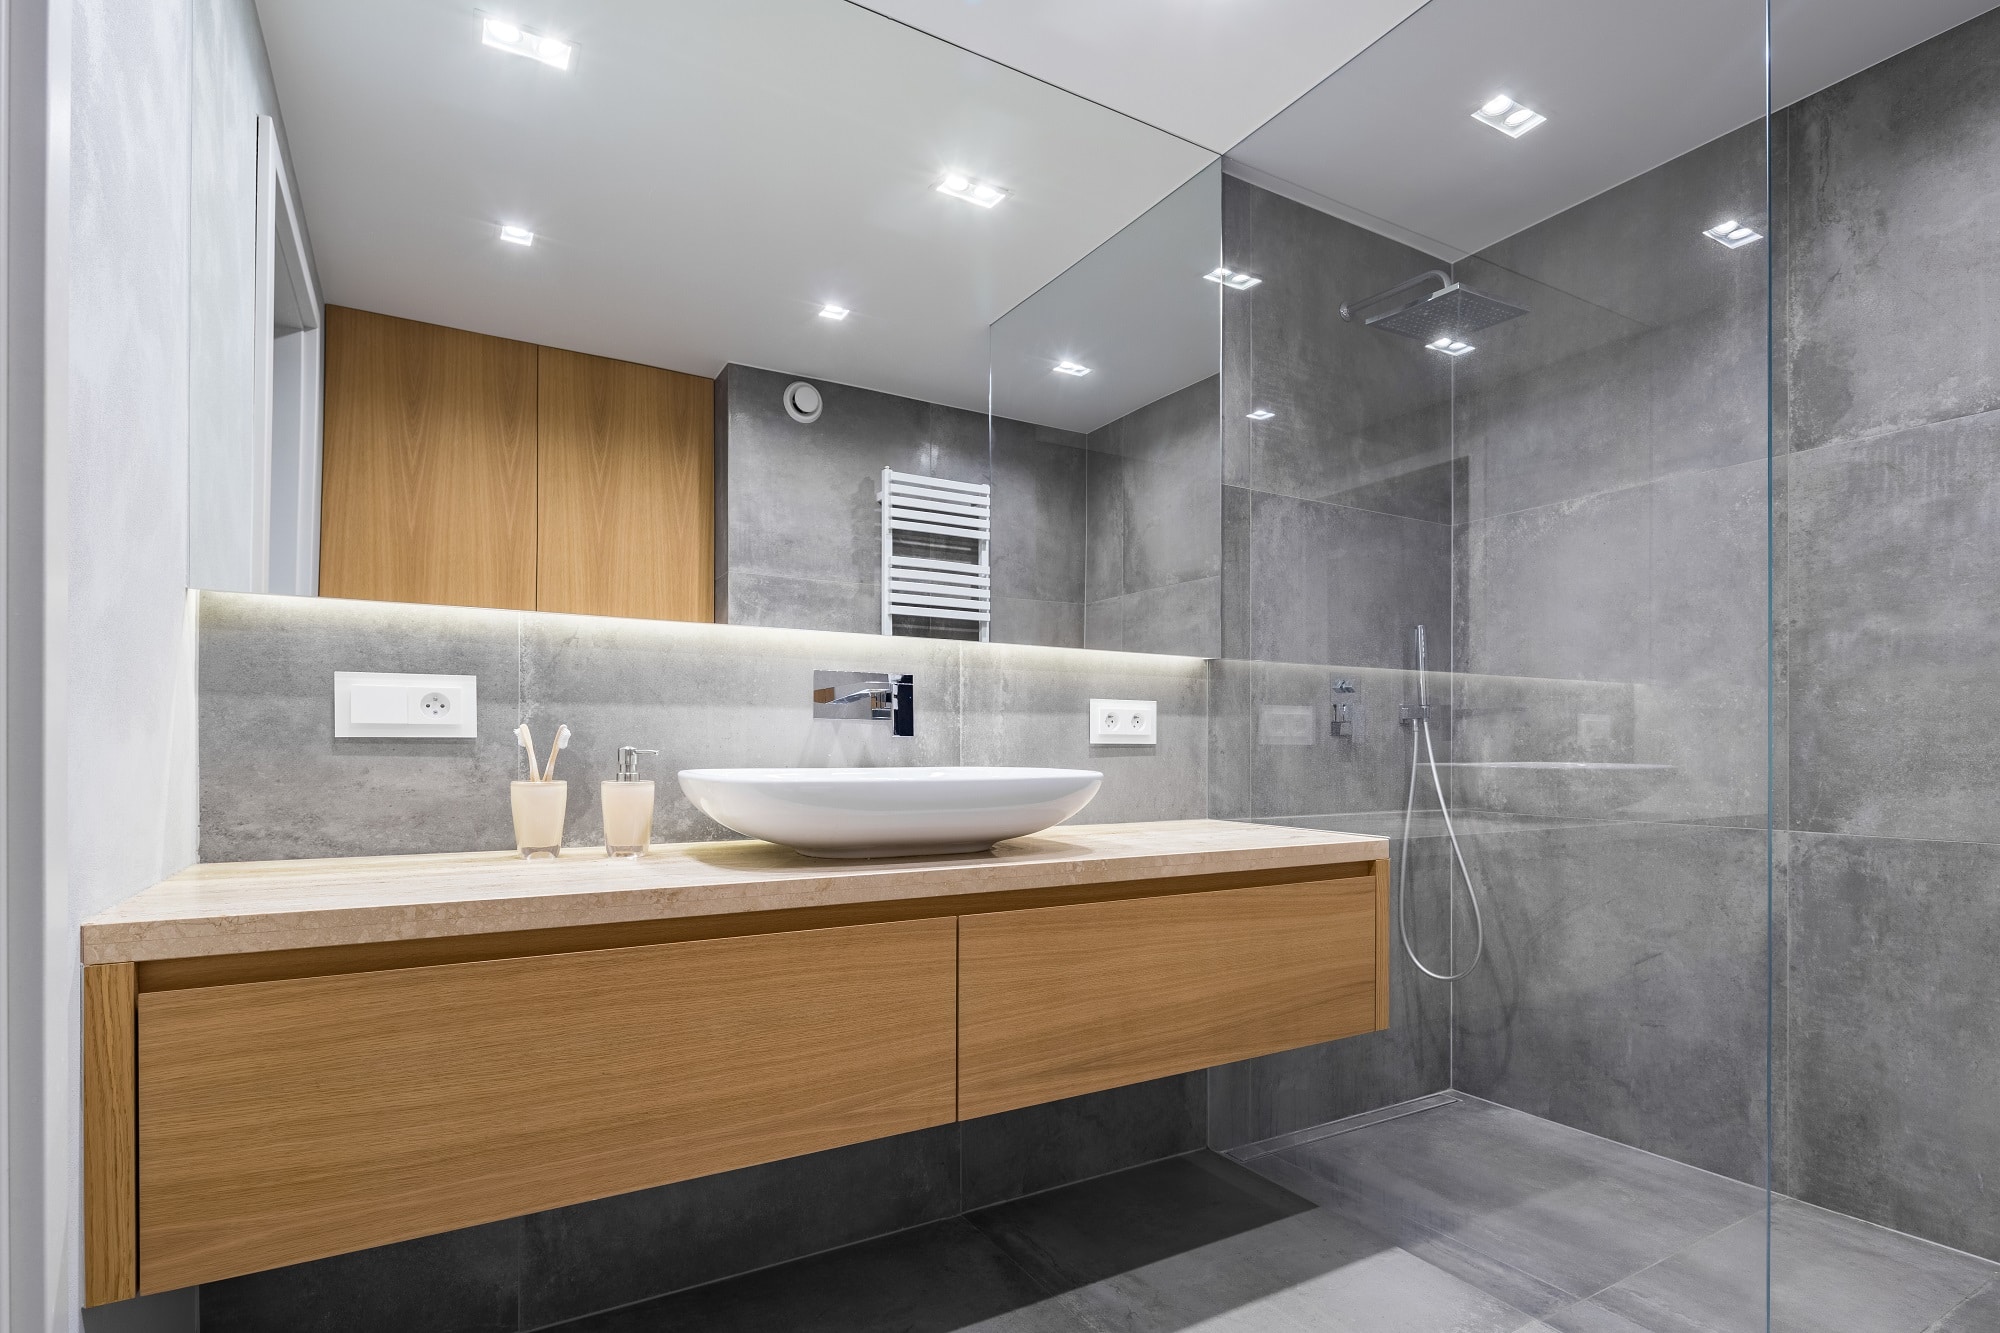 Modern bathroom with large format concrete-look tiles, stepless shower and timber cabinetry with stone top